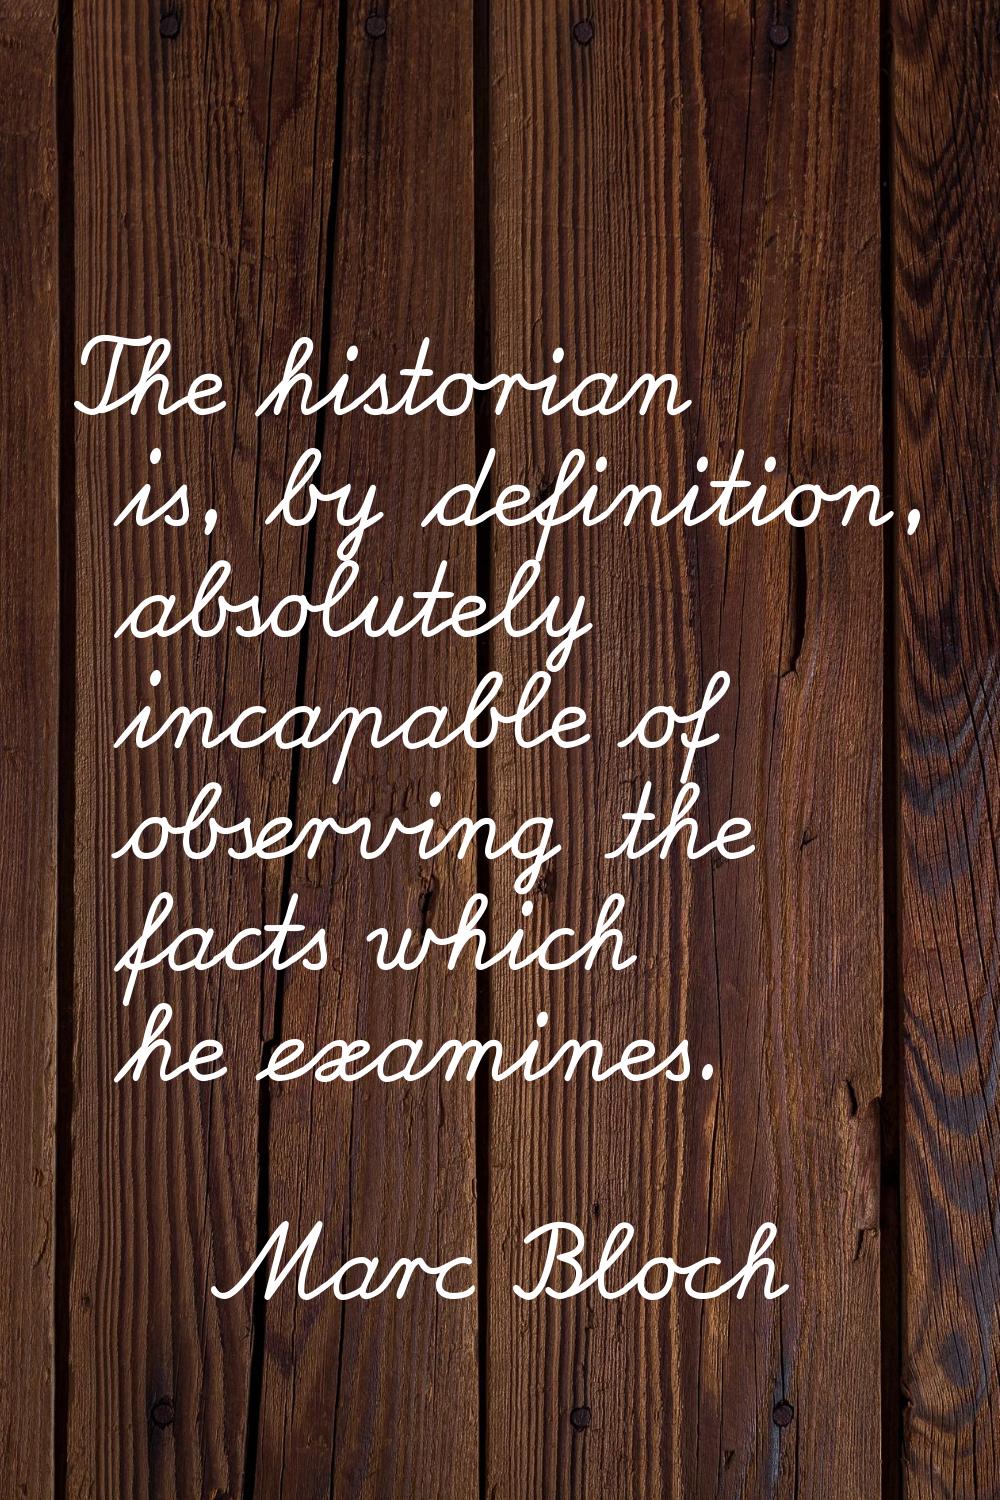 The historian is, by definition, absolutely incapable of observing the facts which he examines.